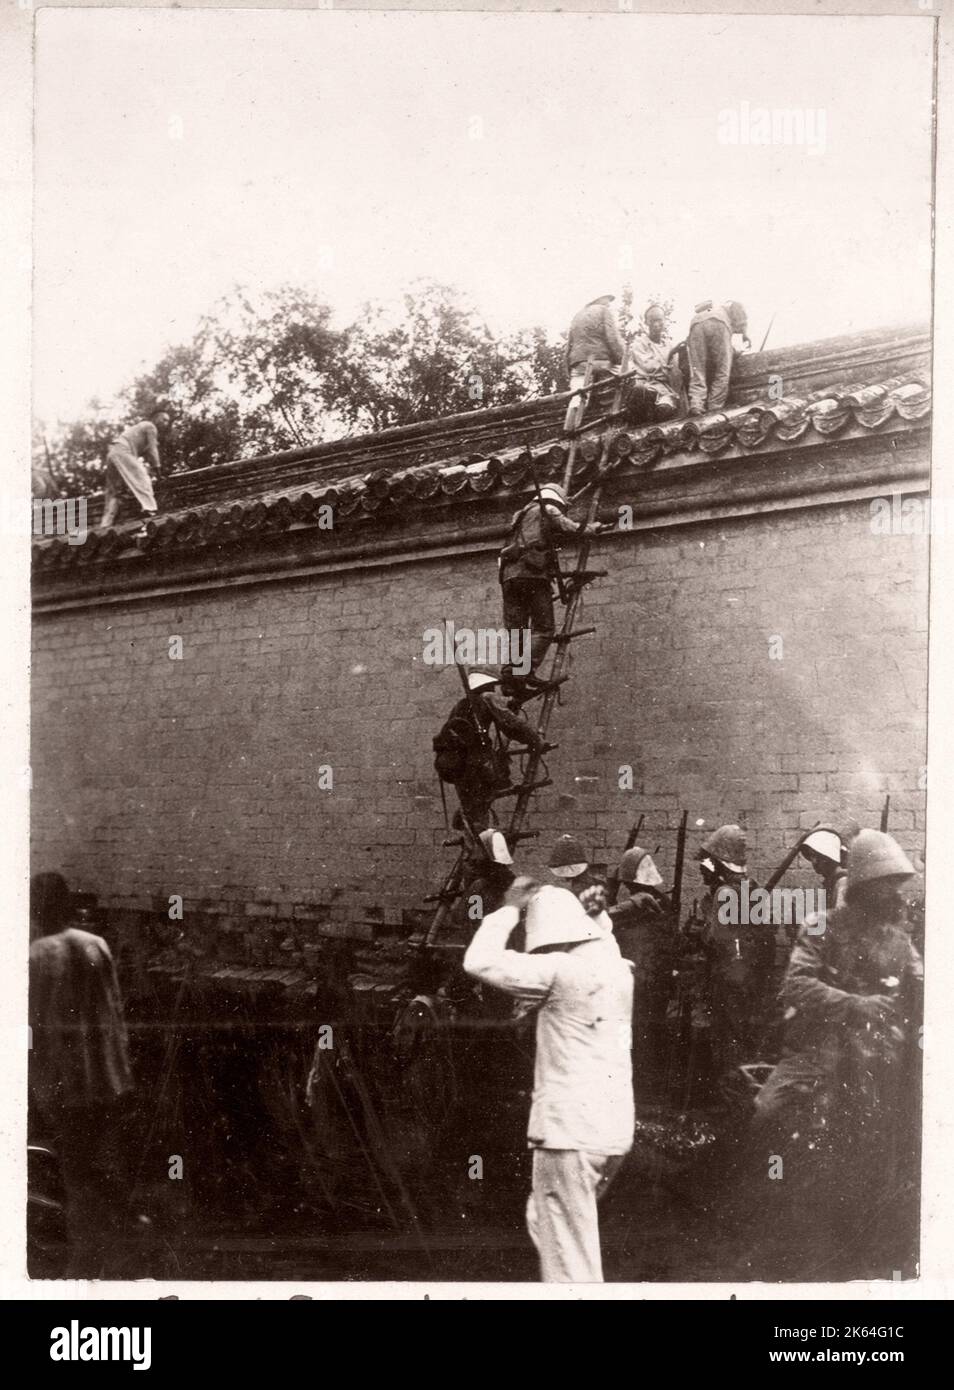 Vintage Photograph China c.1900 - Boxer rebellion or uprising, Yihetuan Movement - image from an album of a British soldier who took part of the supression of the uprising - international troops attacking. Peking/Beijing Stock Photo